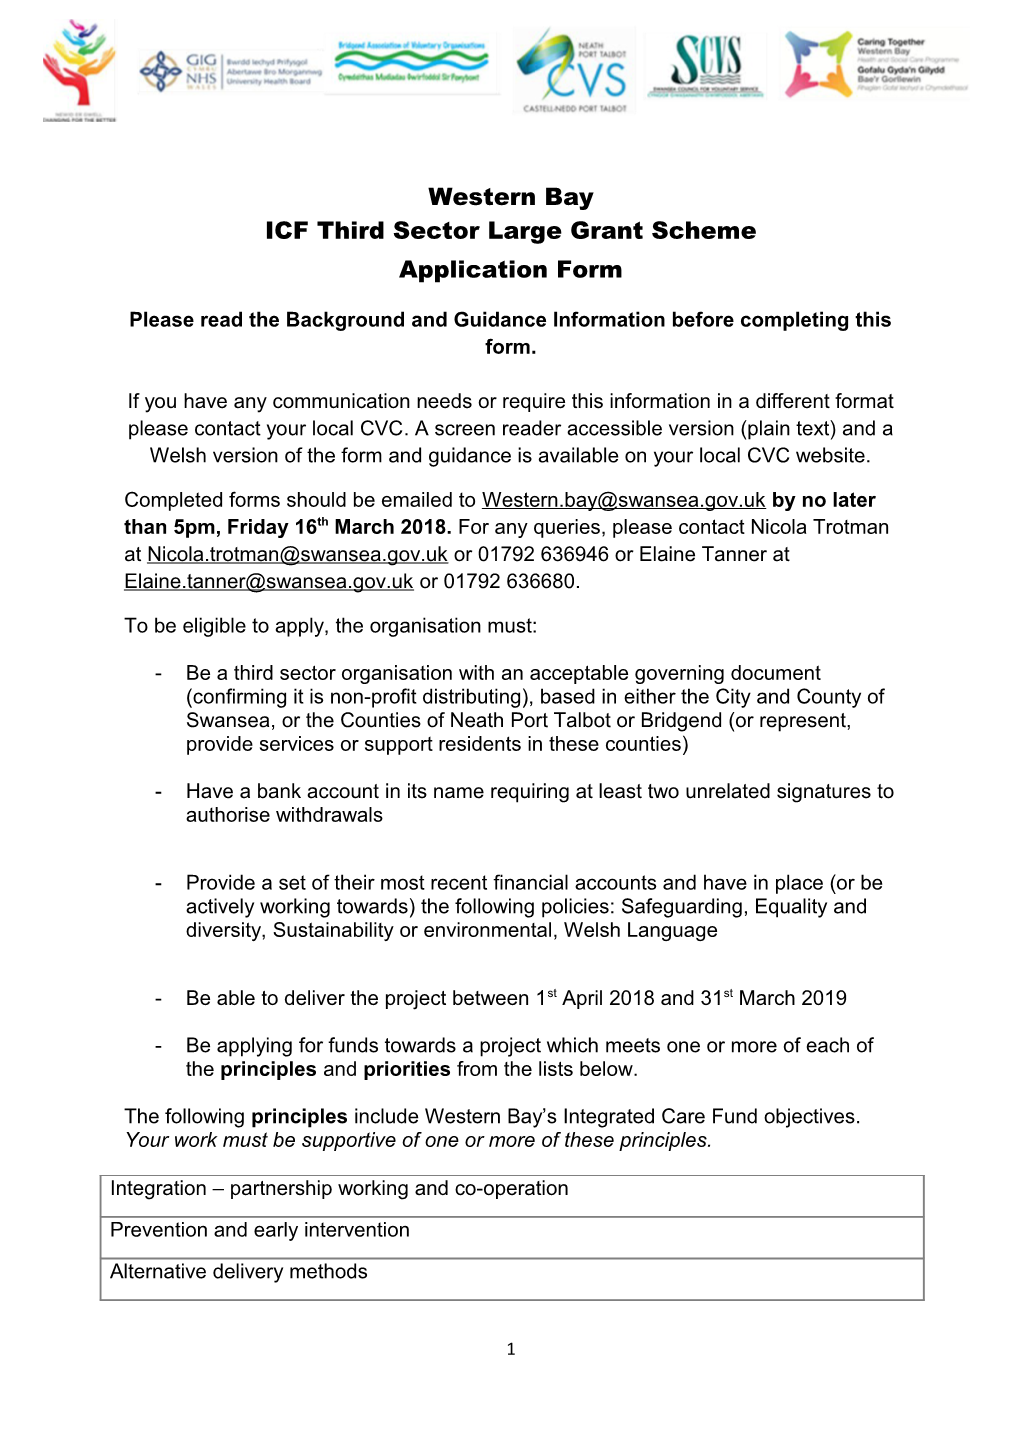 ICF Third Sector Large Grant Scheme Application Form